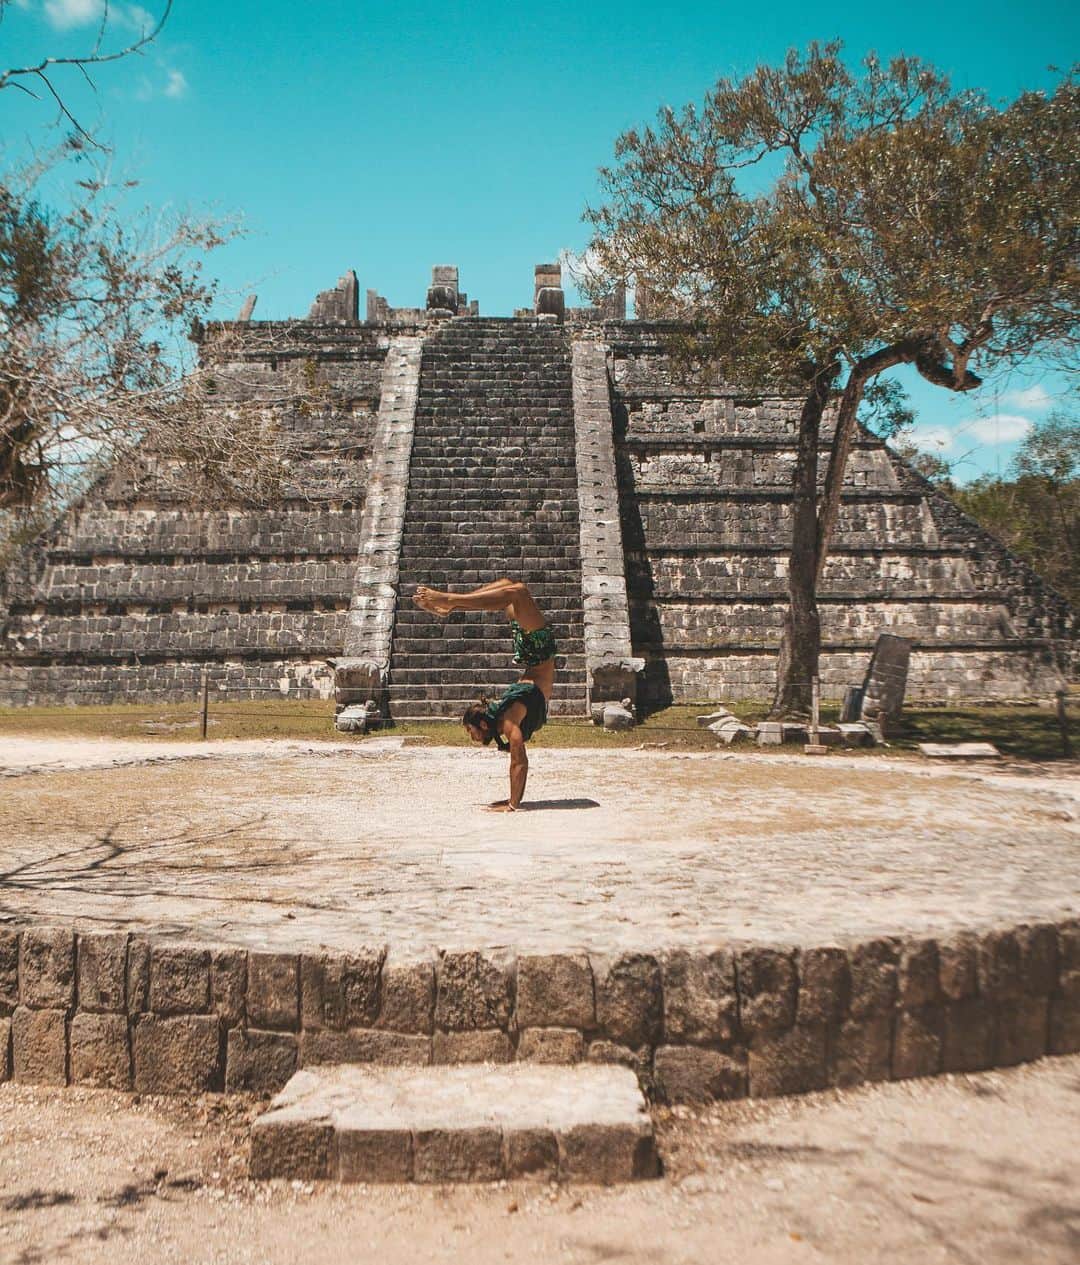 Ricardo Baldinのインスタグラム：「I’ve seen many lizards in Chichen Itza, but this was the first monkey I spotted there 🙉」